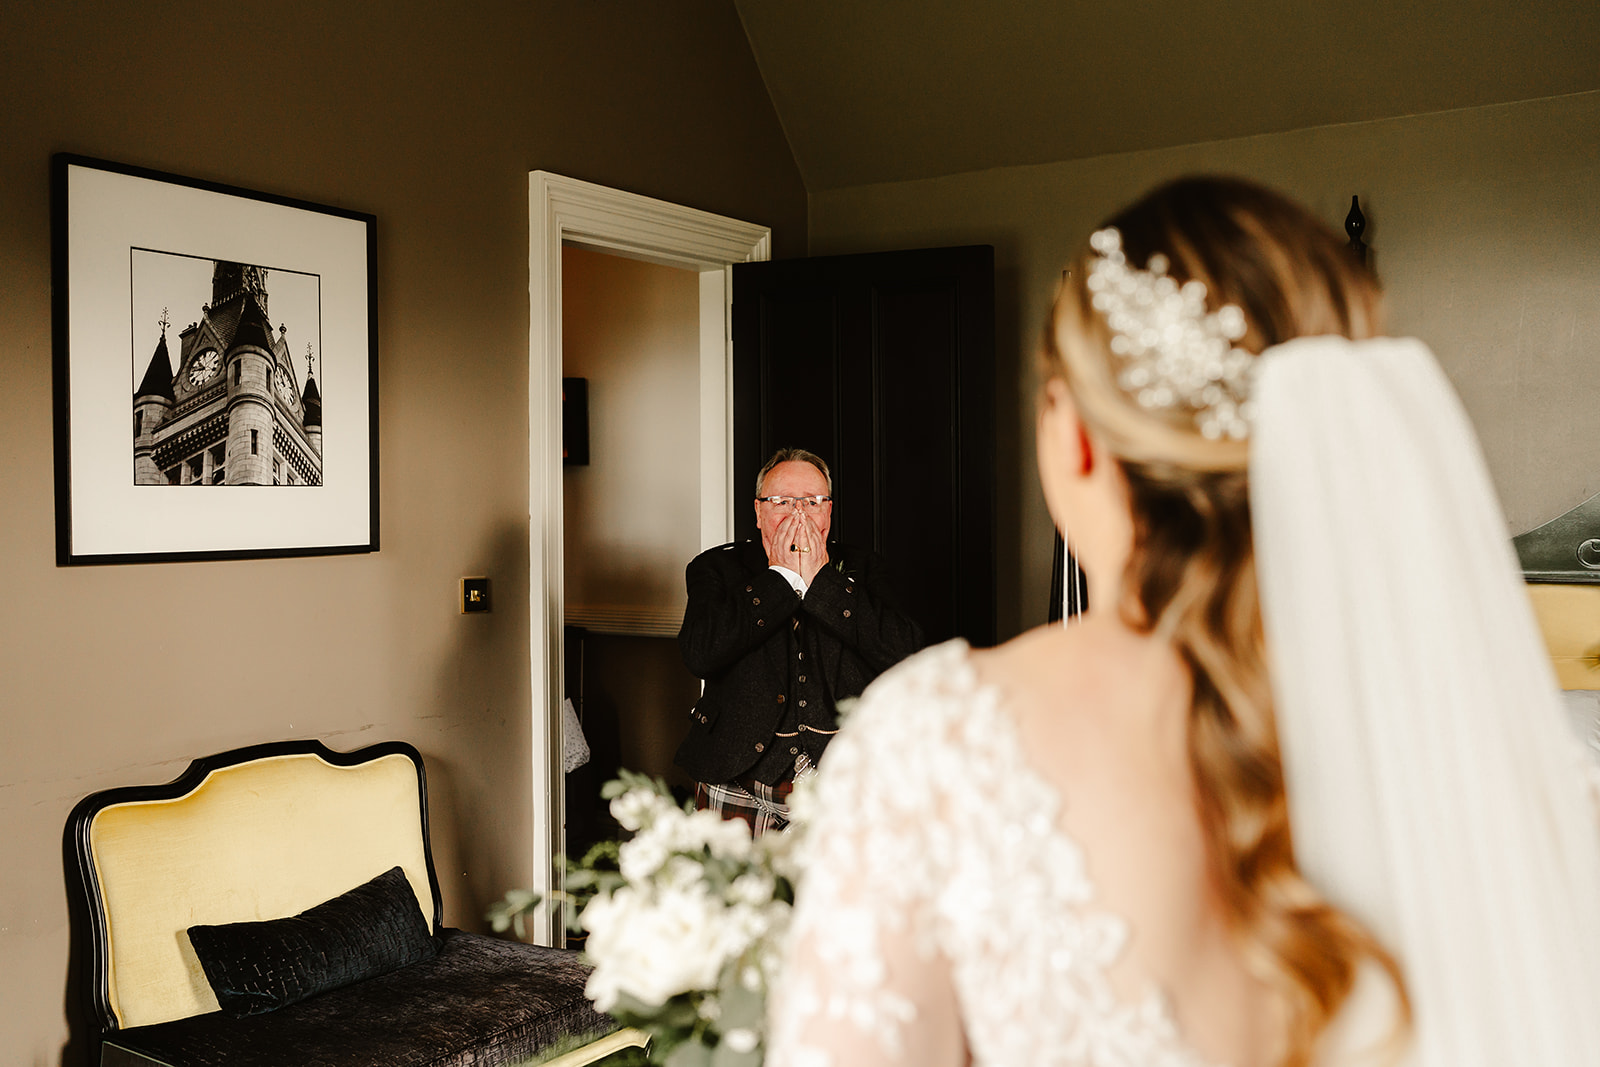 Father of the bride seeing his daughter in her wedding dress for the first time